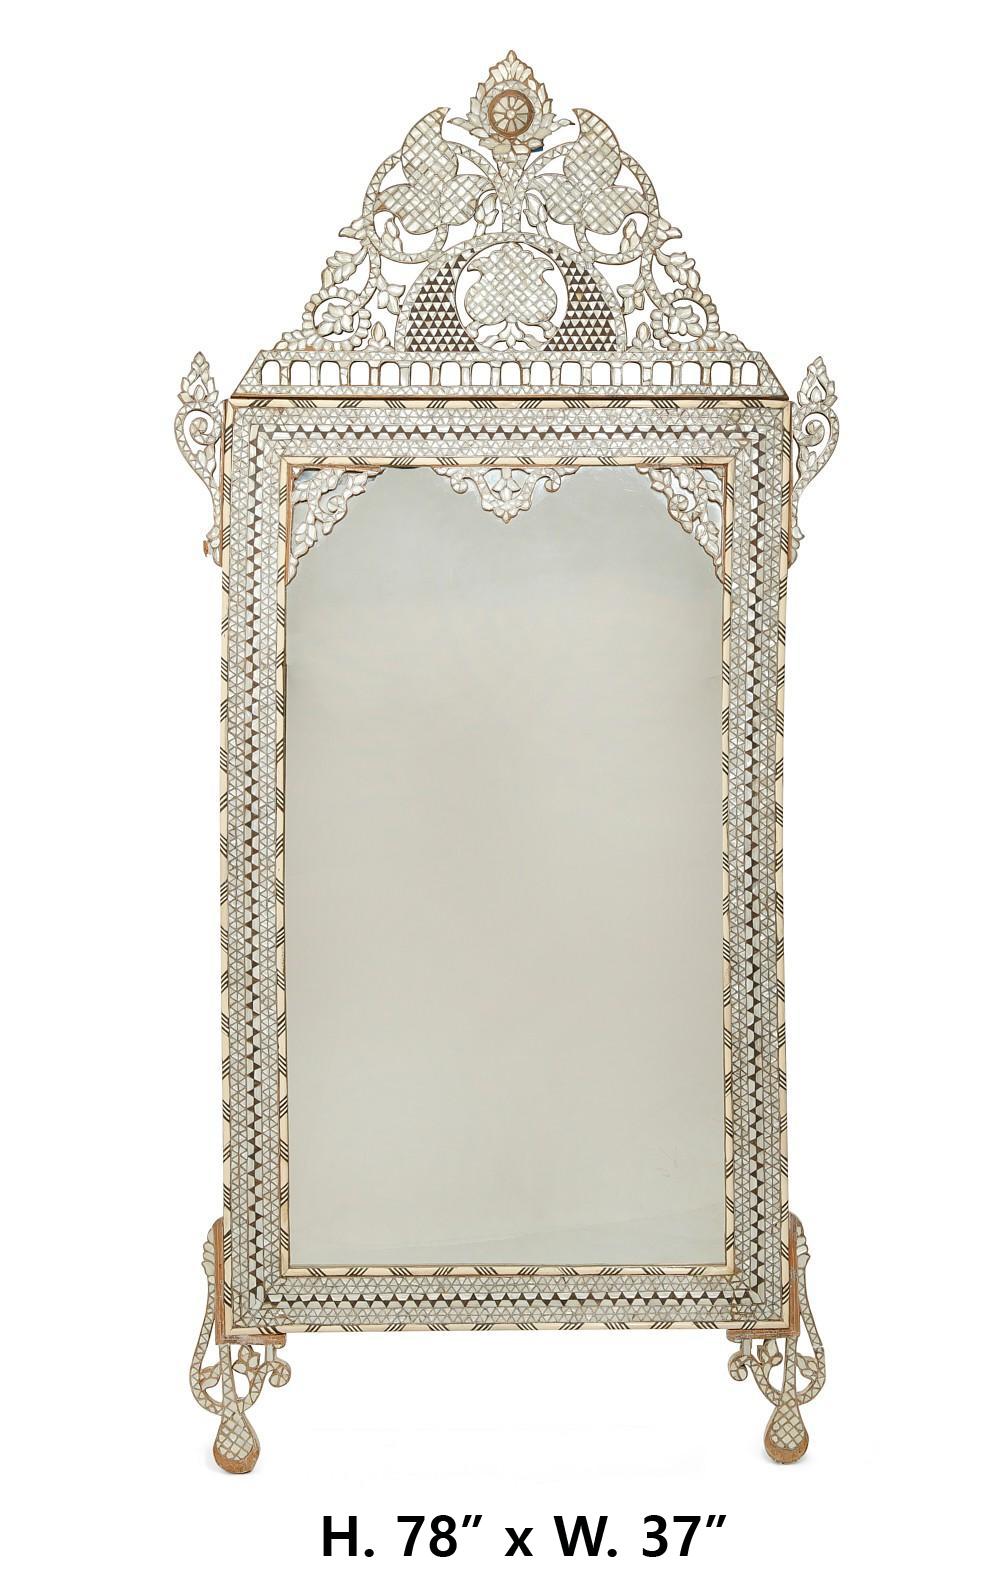 Outstanding Levantine mother of pearl,bone and pewter inlaid hardwood mirror, possibly Moorish.
Late 19th century. 
The elaborate arabesques solid mirror is intricately encrusted with lustrous mother of pearl with sophisticated details, each piece